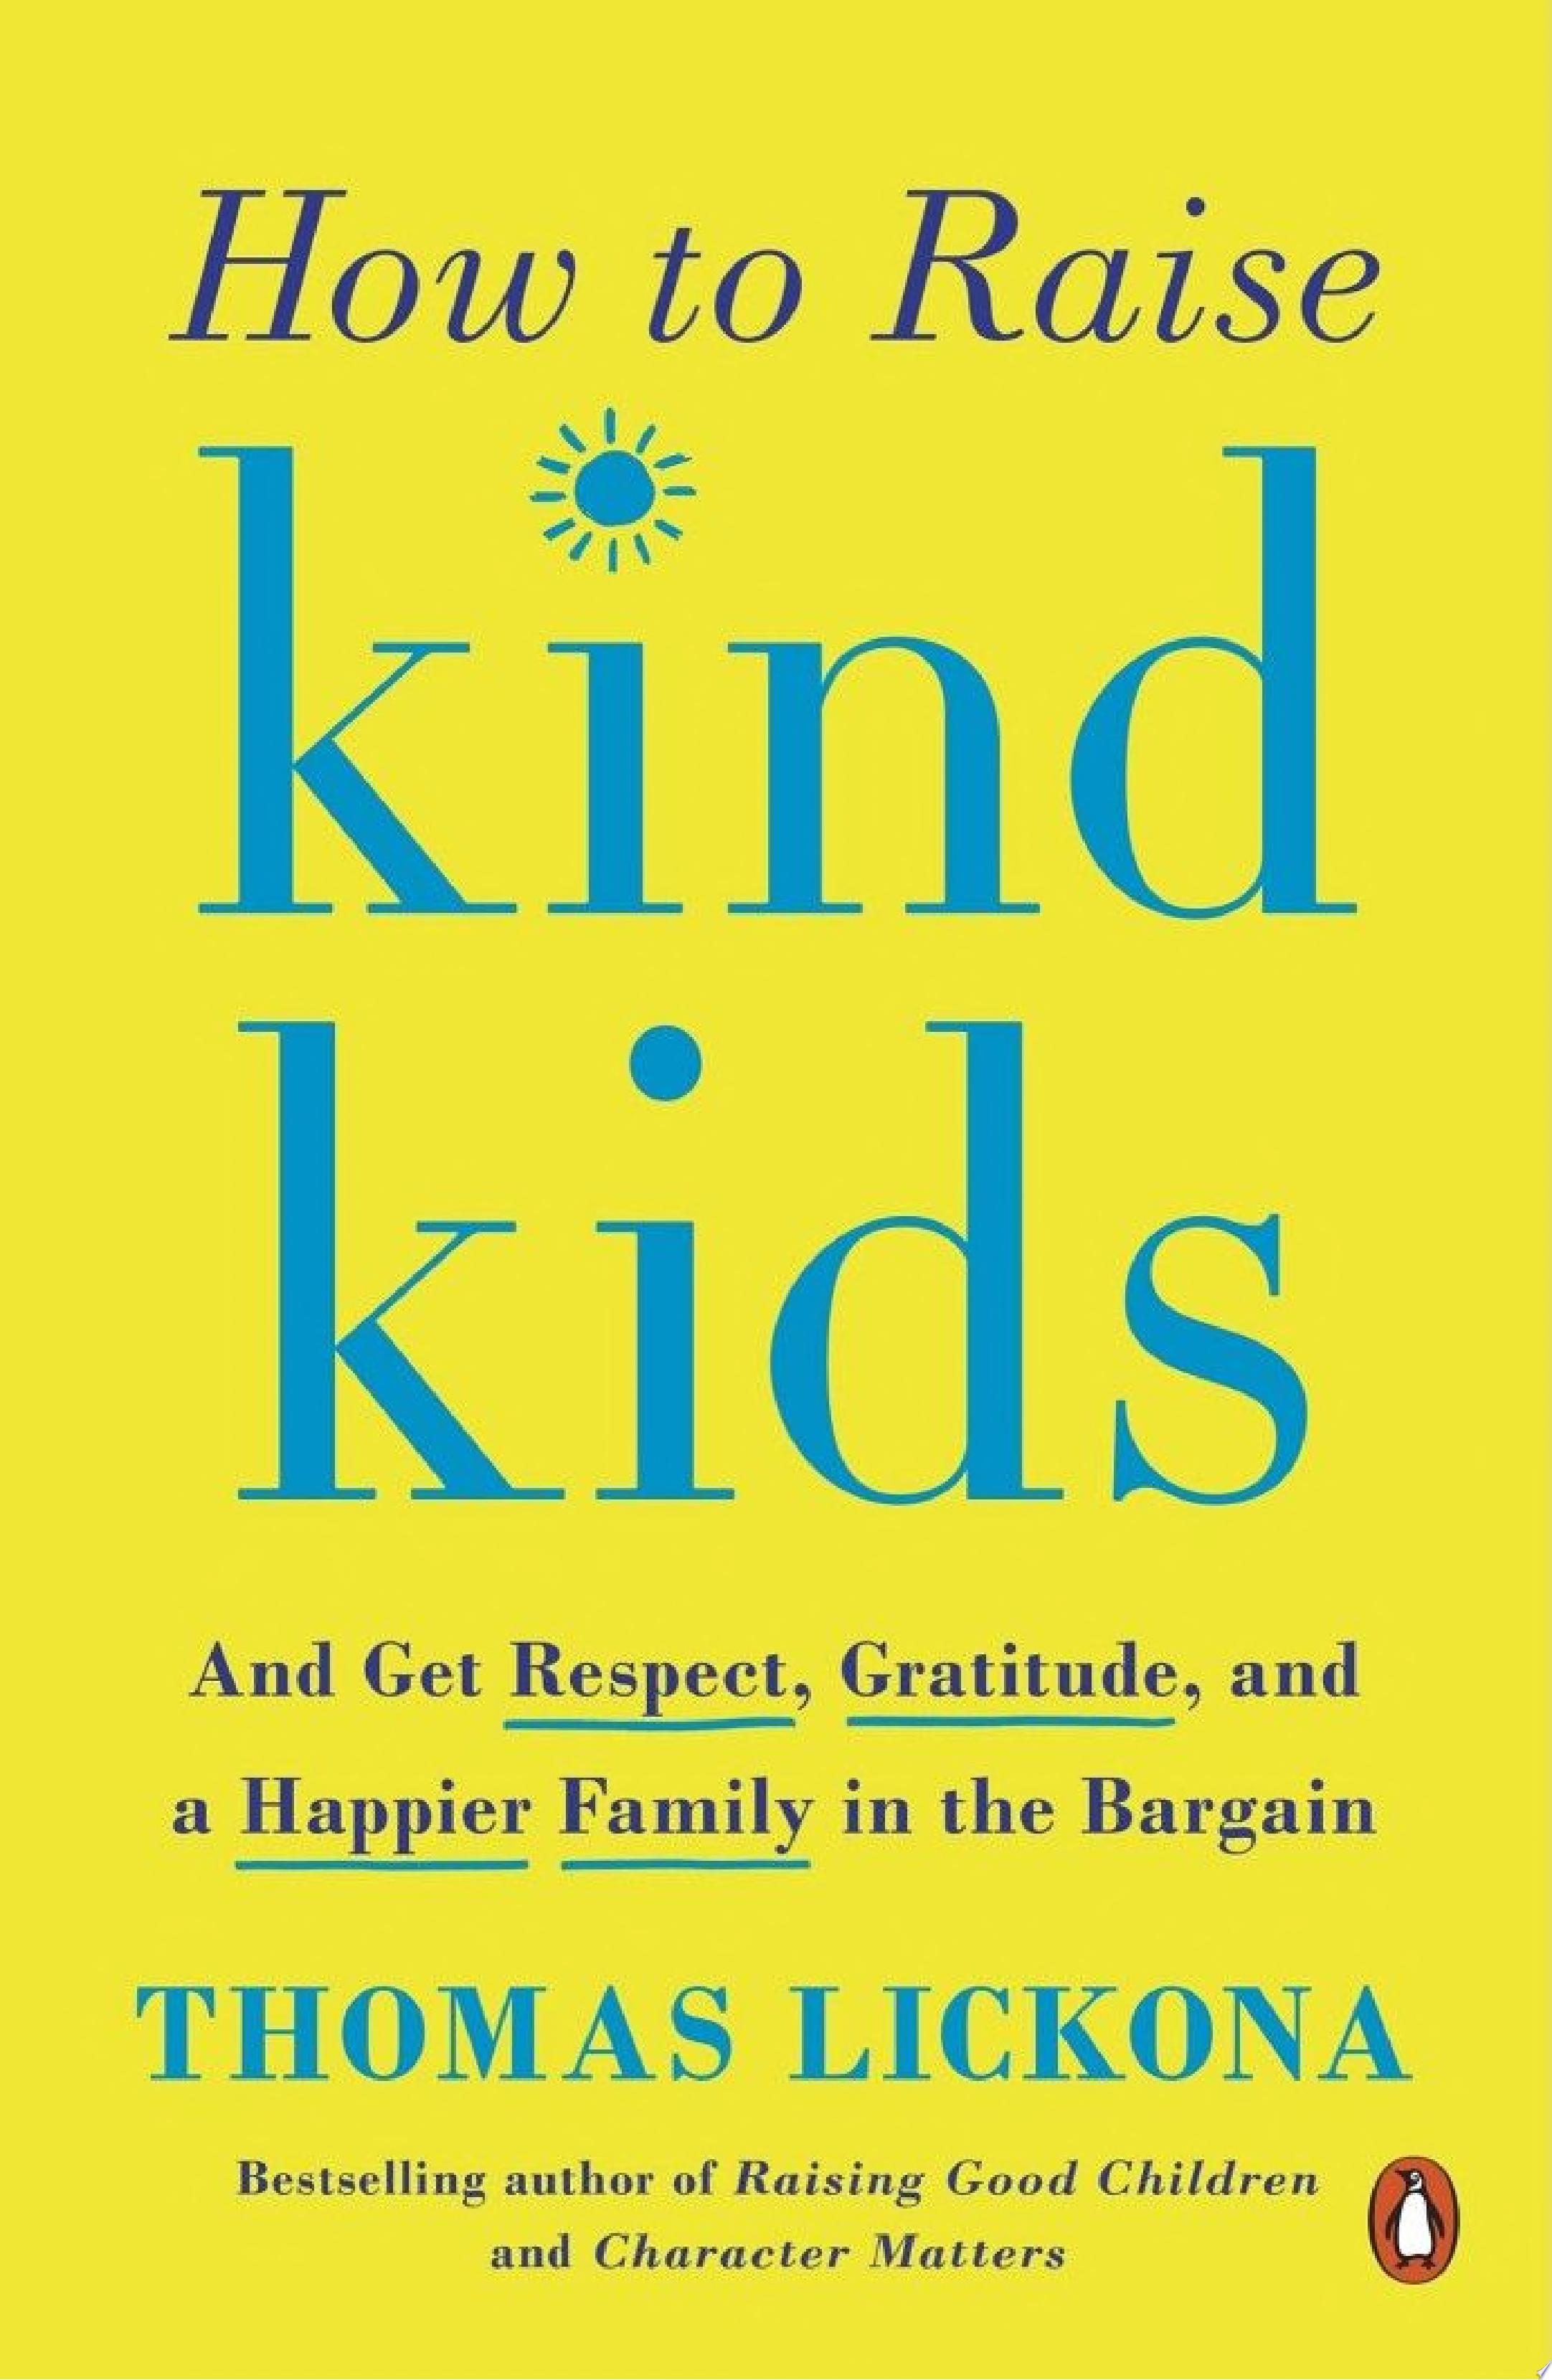 Image for "How to Raise Kind Kids"